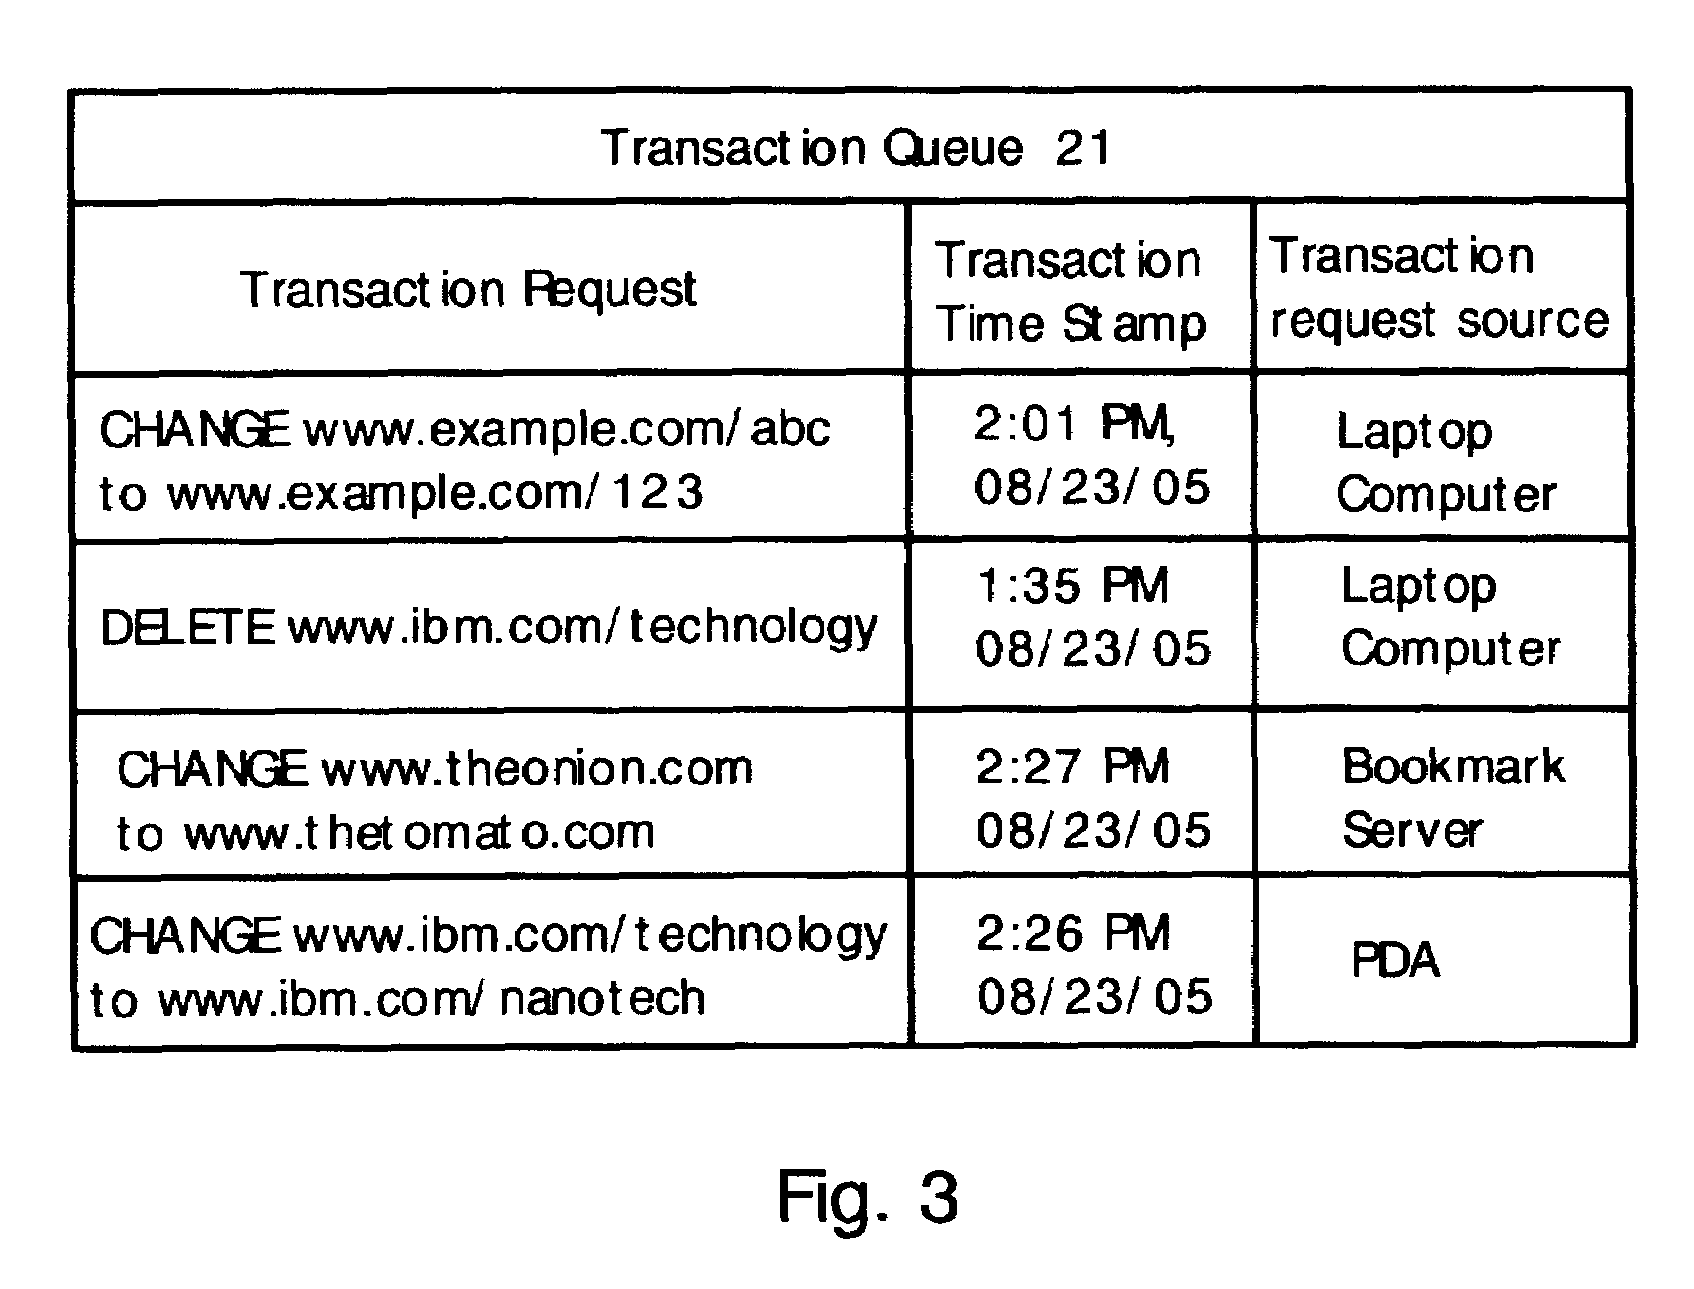 Method for synchronizing and updating bookmarks on multiple computer devices